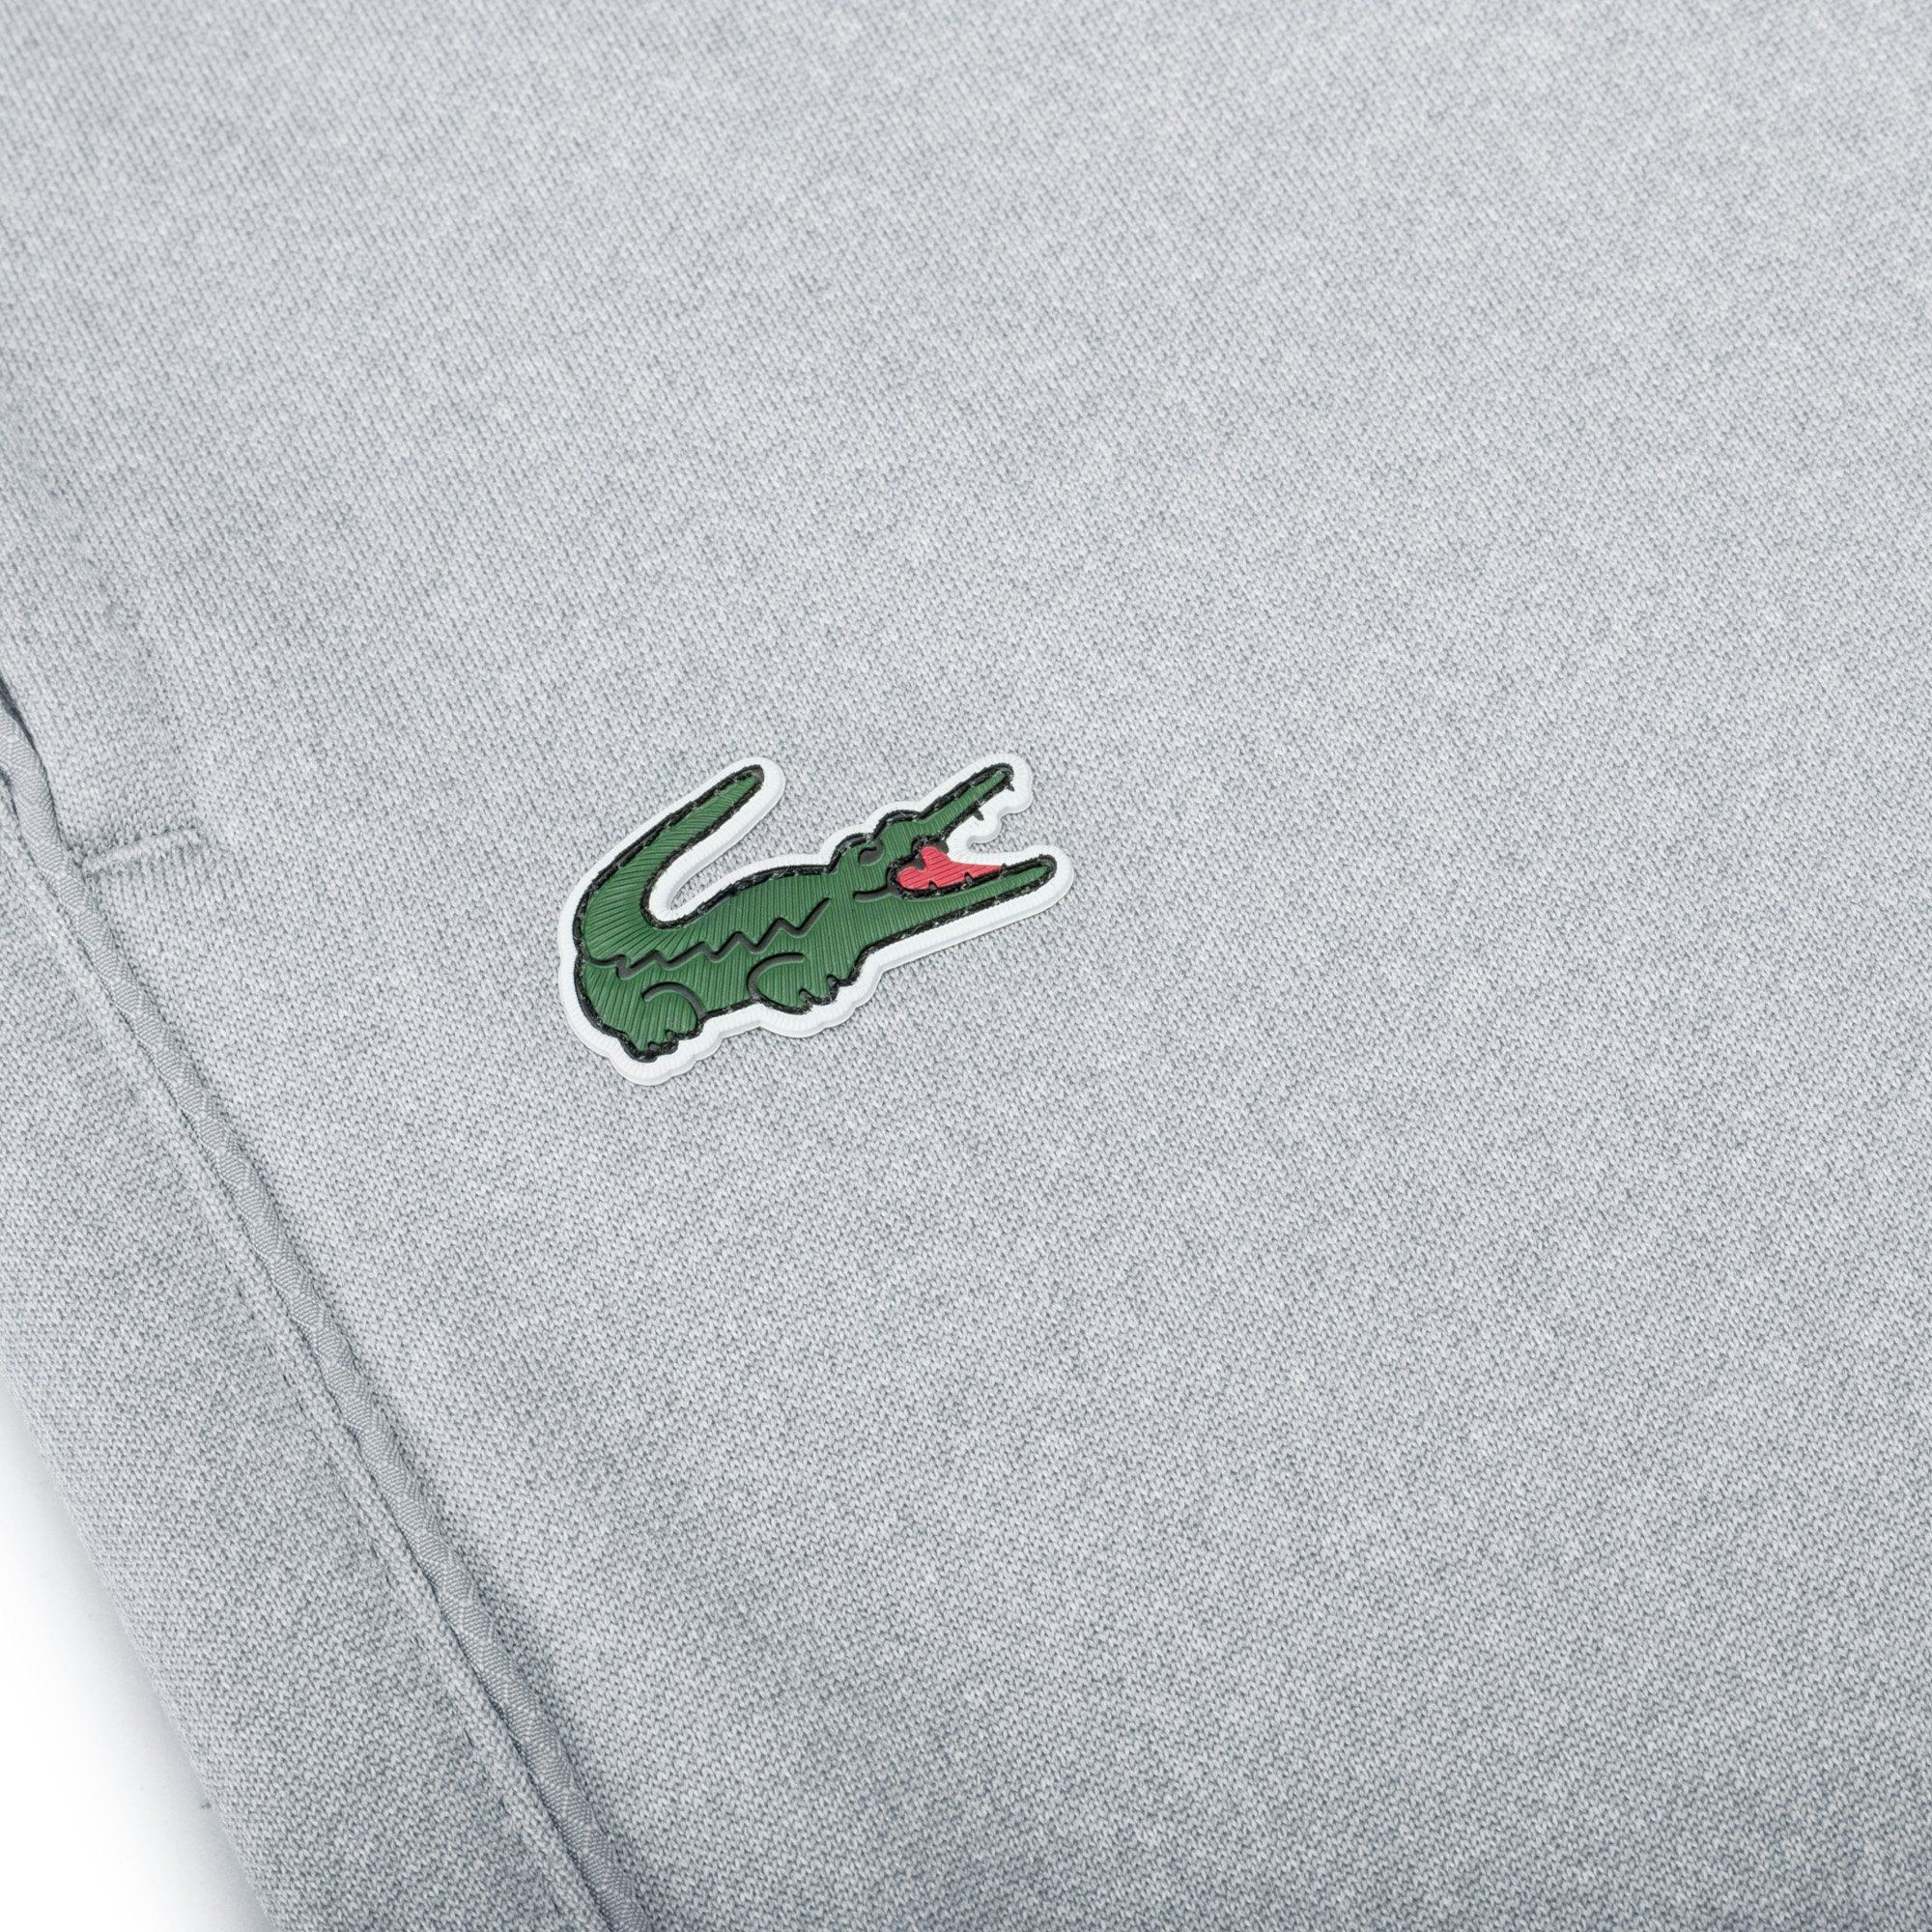 Smooth Poly Fleece Fabric
Soft Feel
Elasticated Waistband with Drawcords
Two Side Pockets
Tapered Cuffs
Lacoste Croc Logo on Thigh
Reflective Lacoste Branding on Leg
Standard Fit
Machine Washable
100% Polyester